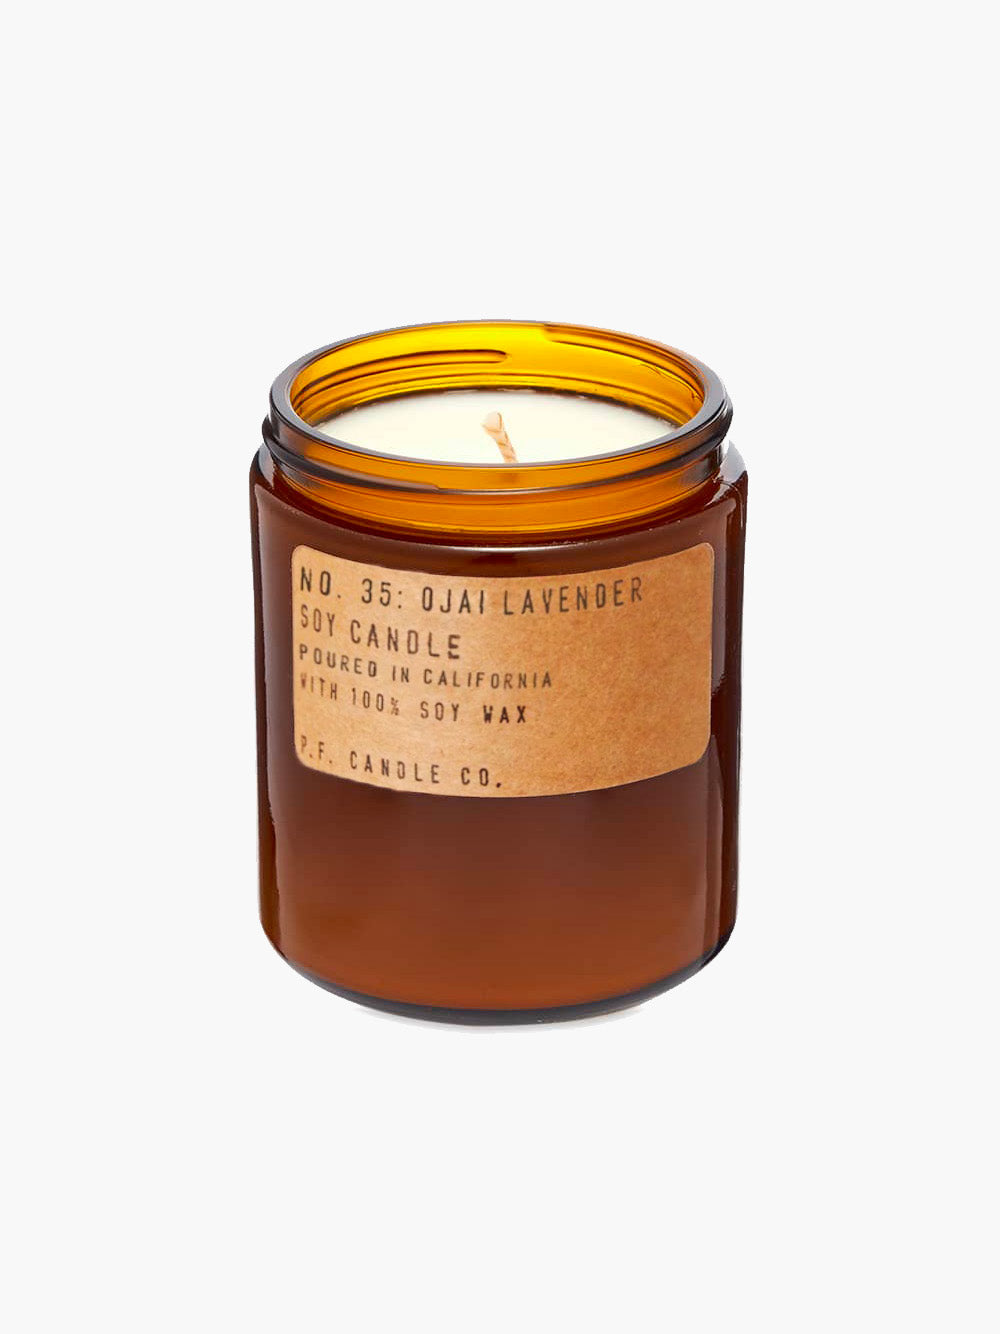 P.F. Candle Co. 204g Soy Candle - No.35 Ojai Lavender